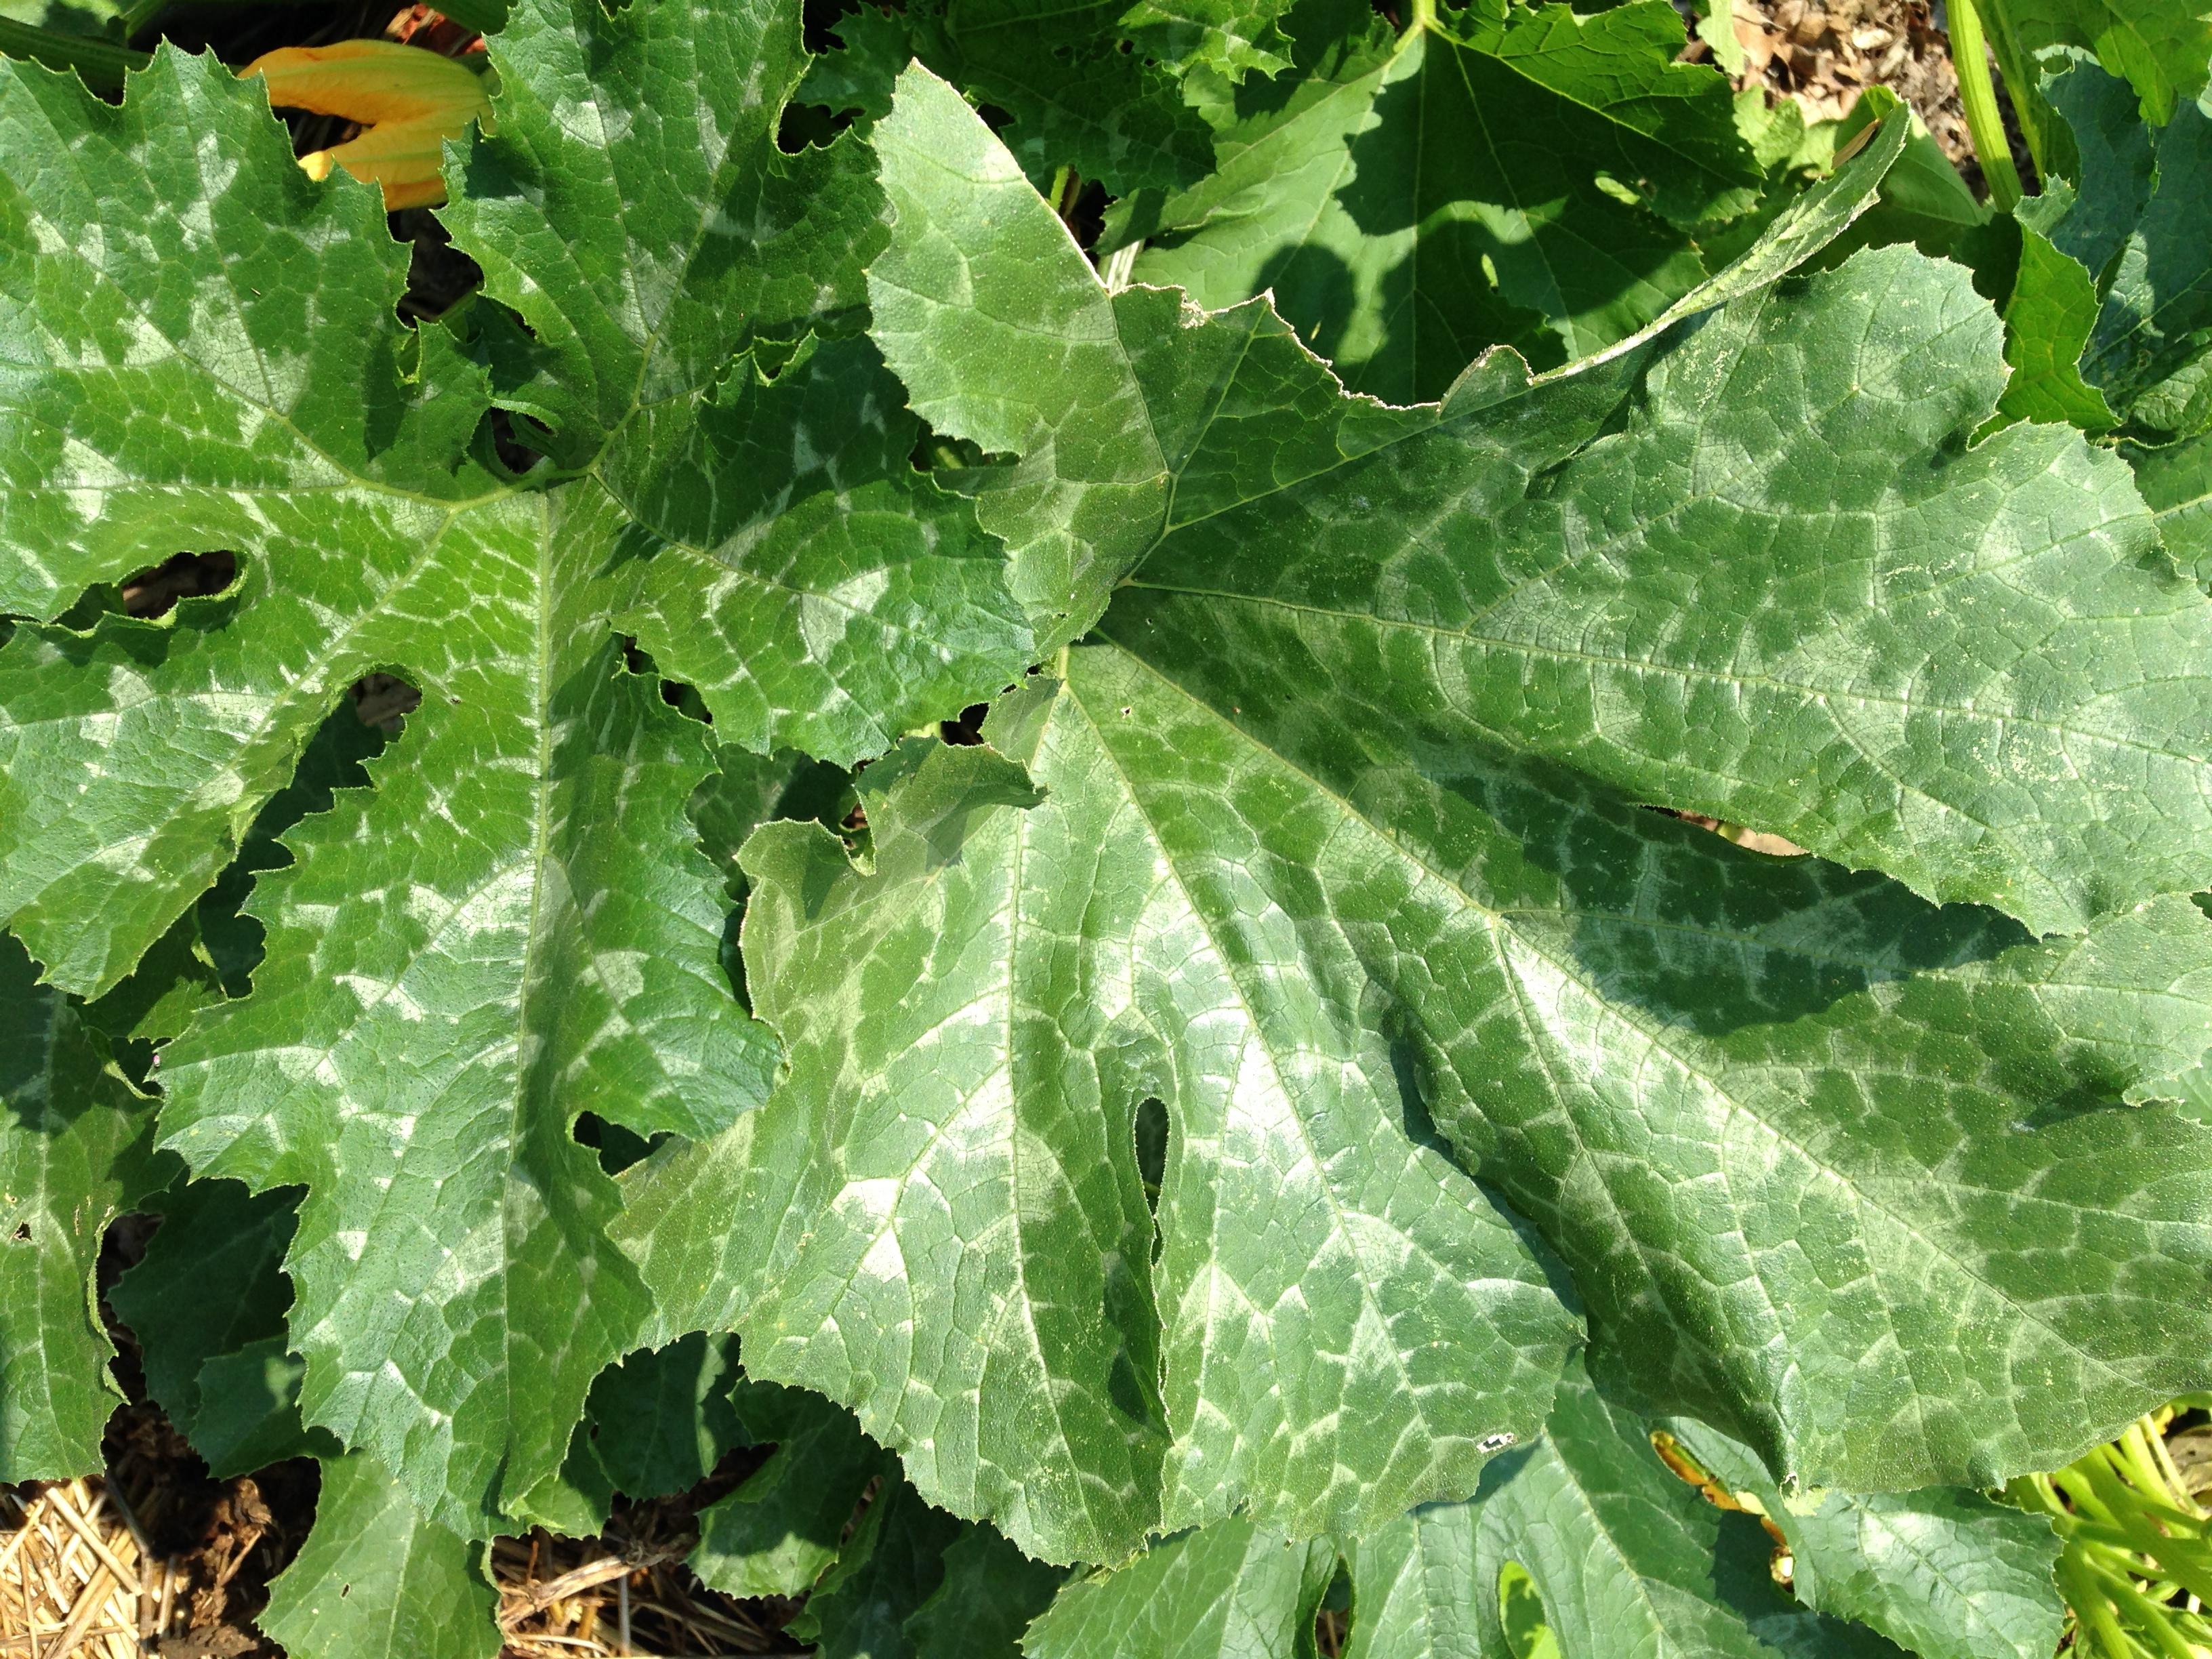 squash leaves have a normal white pattern on them